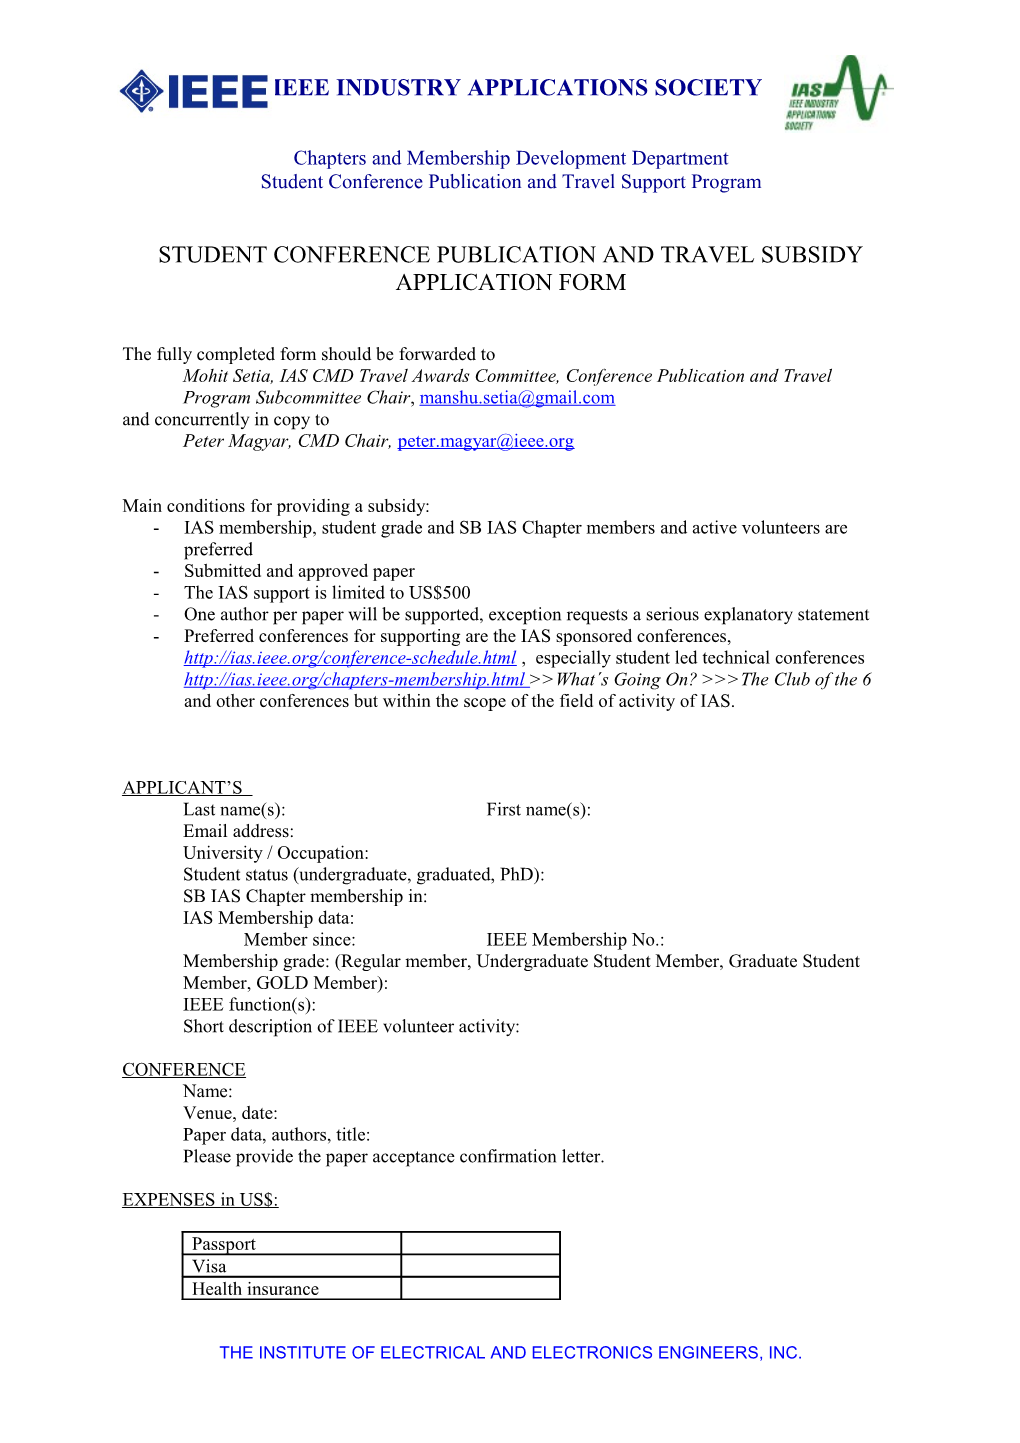 P. Magyar / Student Conference Subsidy Application Form